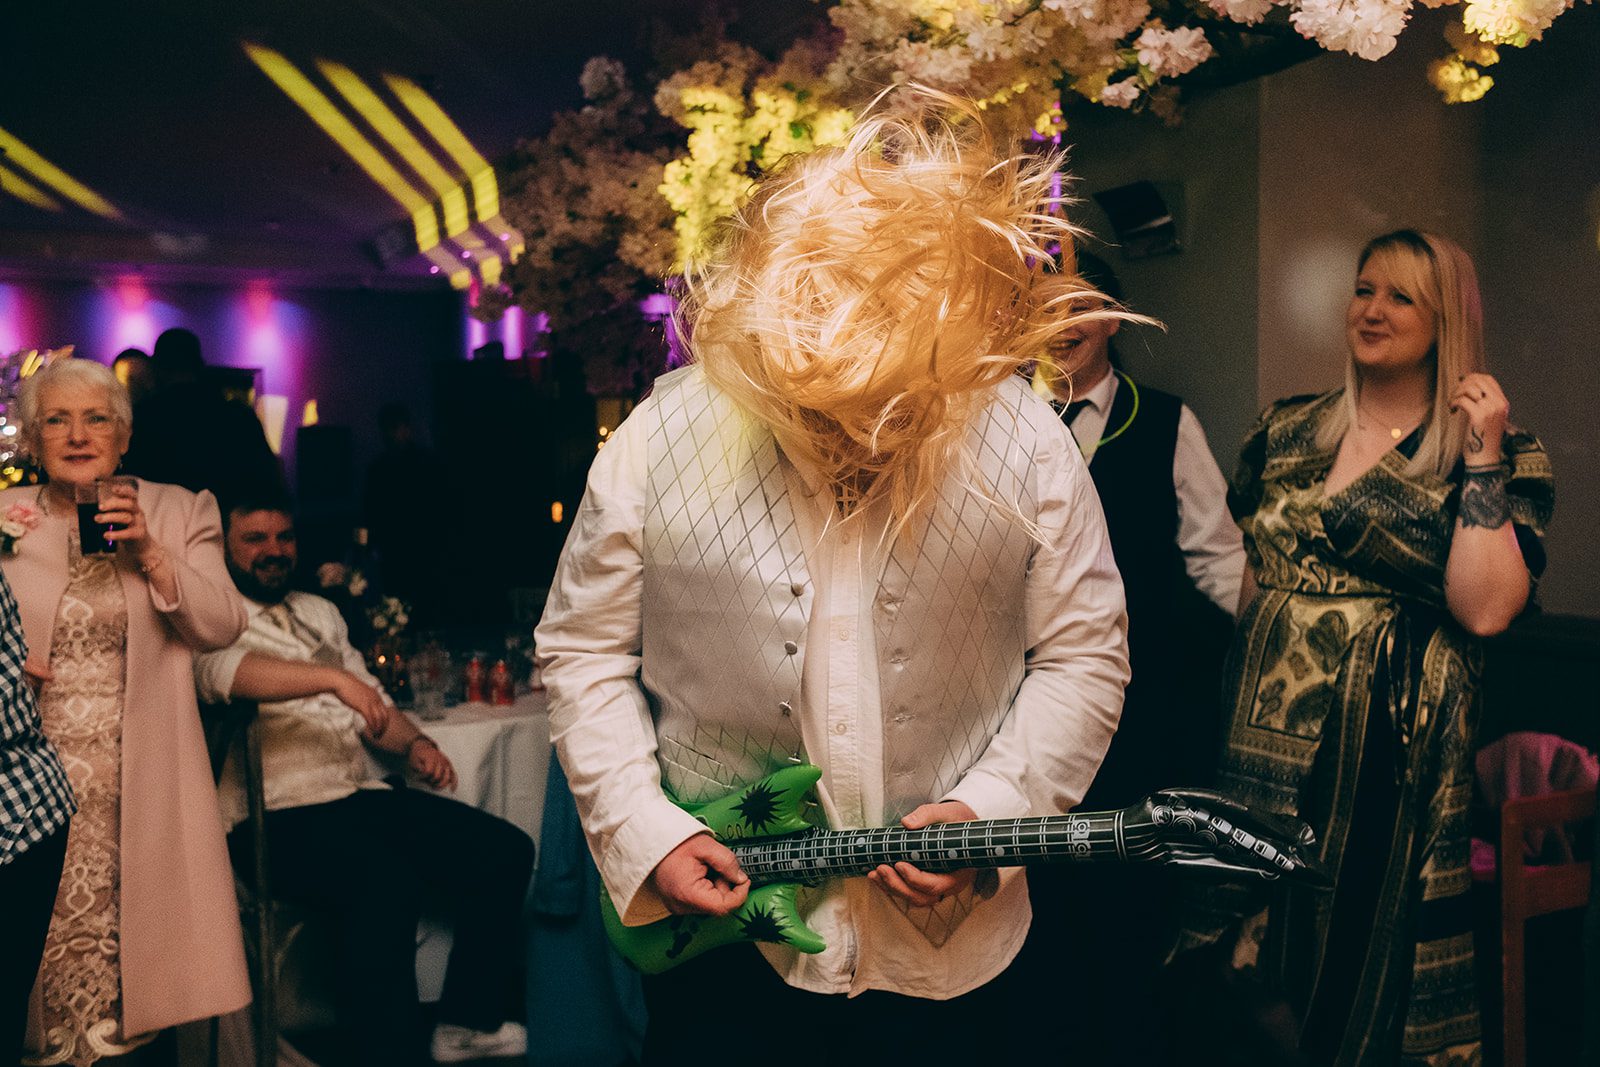 Wedding Guest in a blonde wig, headbanging with a blow up guitar